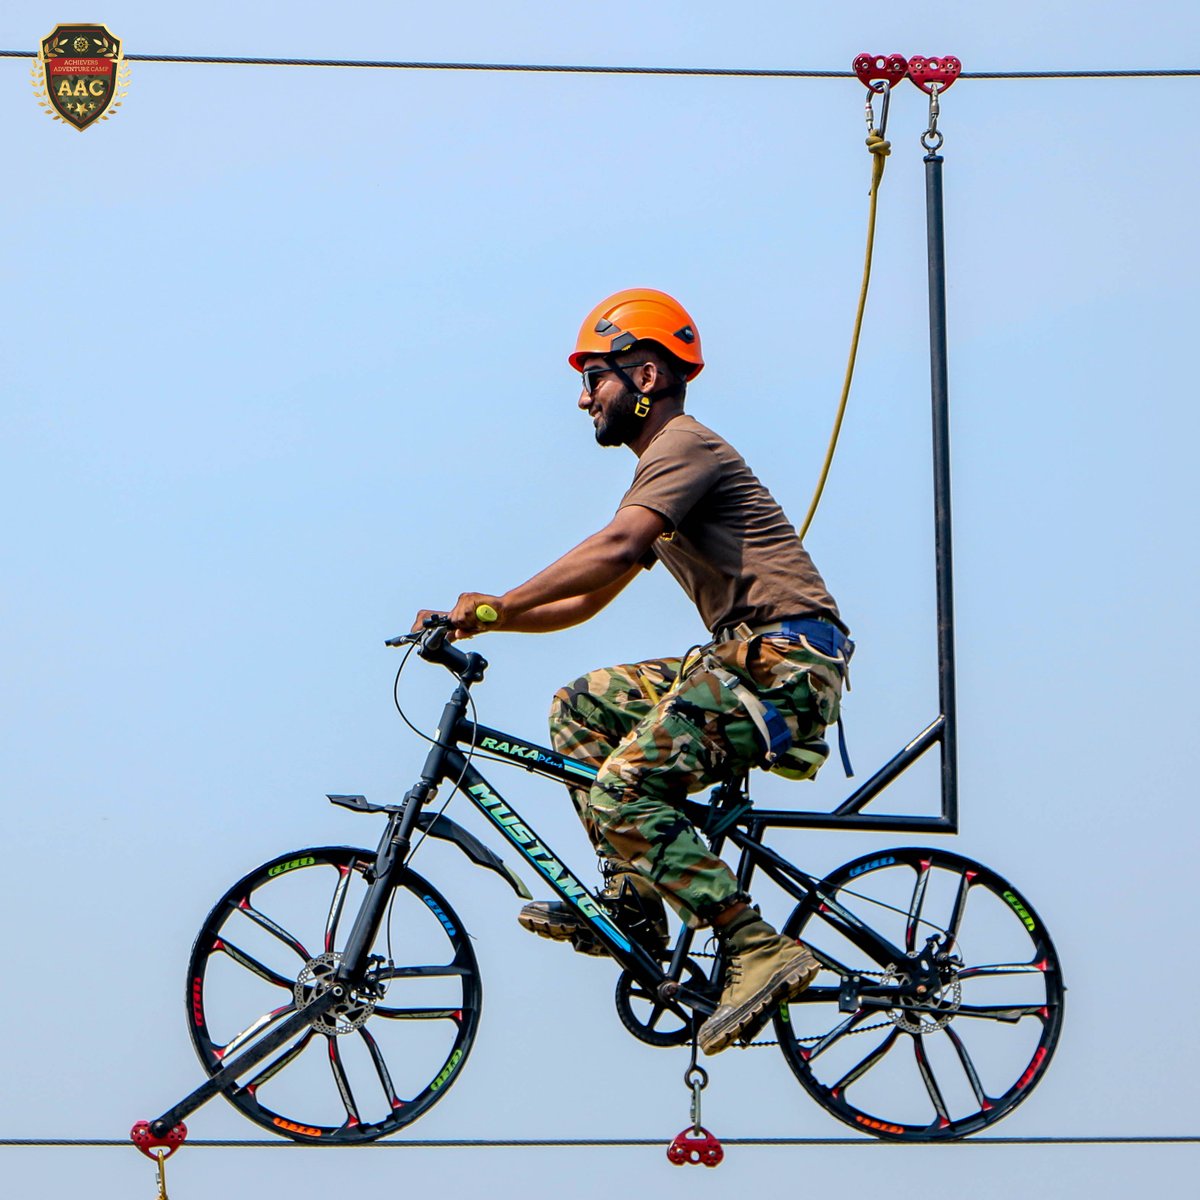 'From sunrise to sunset, we never stop striving for excellence. ⛅🌙'

Know More:
📞 9226512391

#AchieversAdventureCamp #MilitaryThemedTraining #CentralIndiaAdventure #MilitaryInspiredTraining #PushYourLimits #ChallengeYourself #AdventureFitness #OutdoorTraining #AdventureJoy